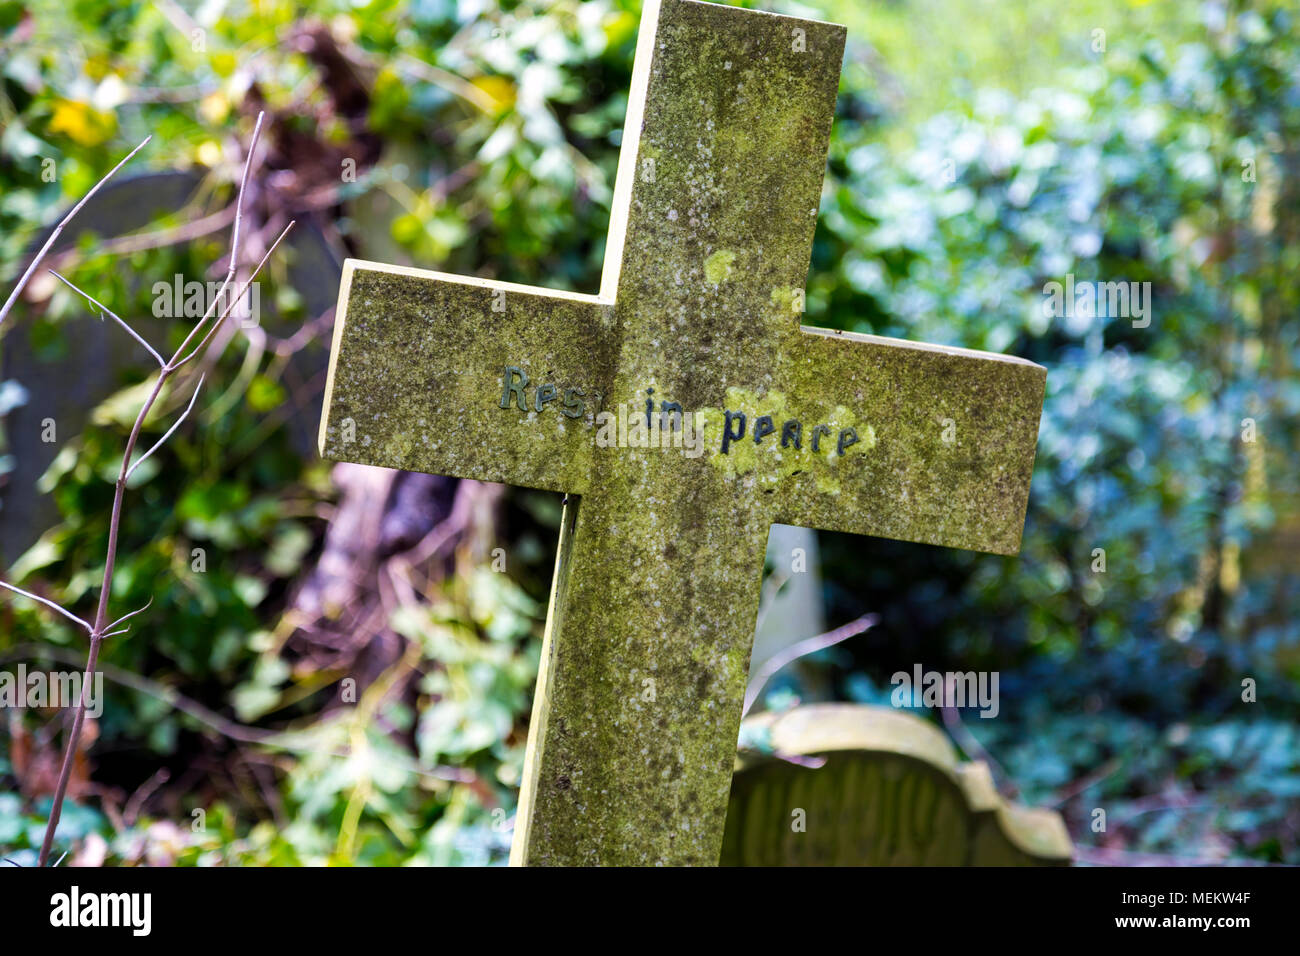 A cross with 'Rest in peace' written on it, Abney Park cemetery, one of the Magnificent Seven cemeteries in London, UK Stock Photo